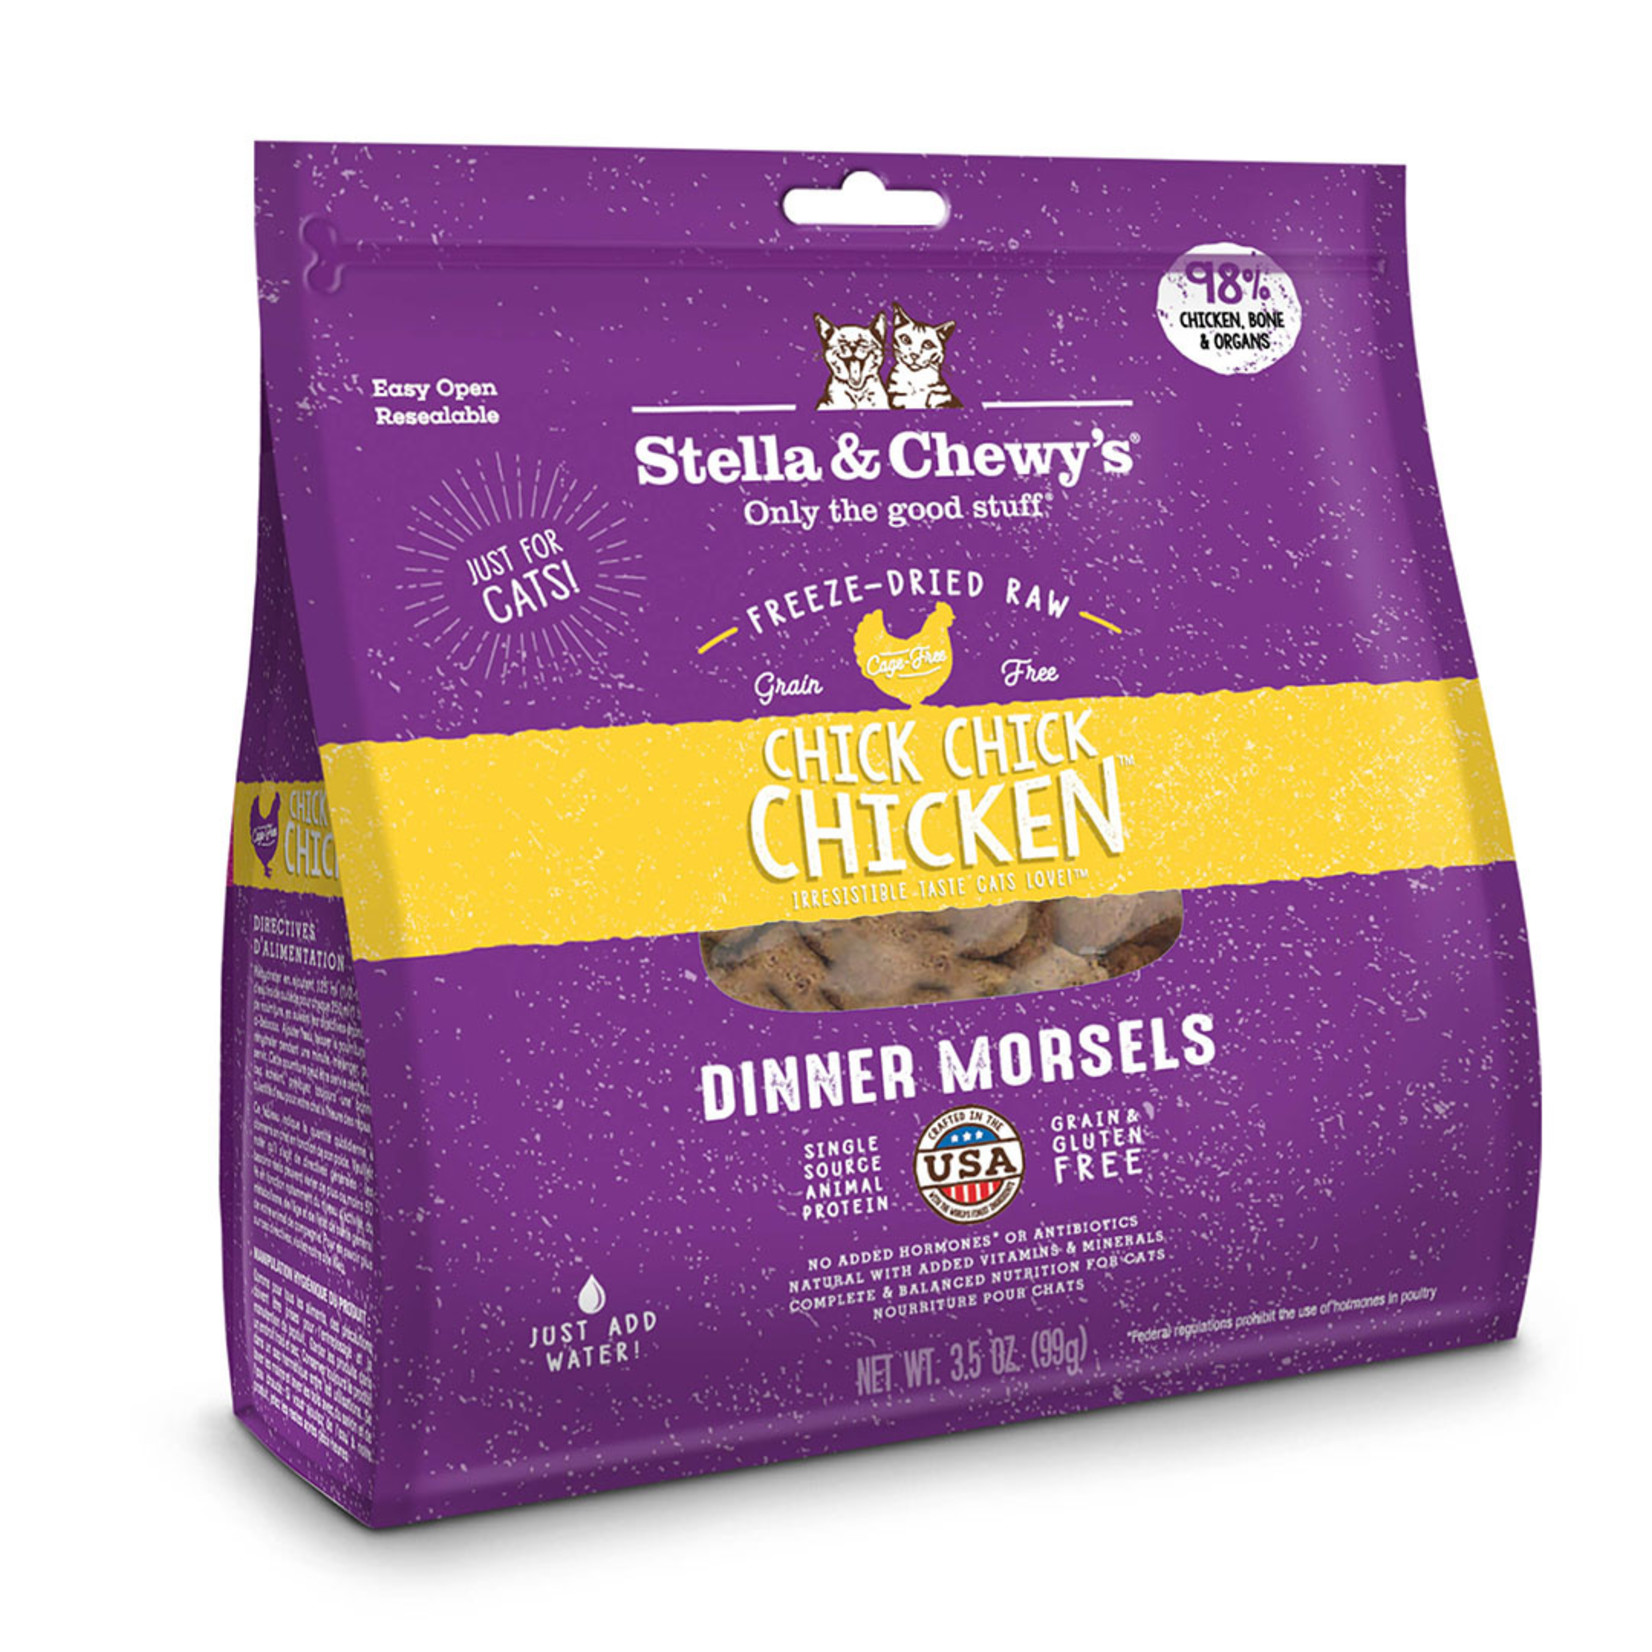 Stella & Chewys Stella & Chewy's Freeze Dried Chick, Chick Chicken Morsels Cat Food 9oz